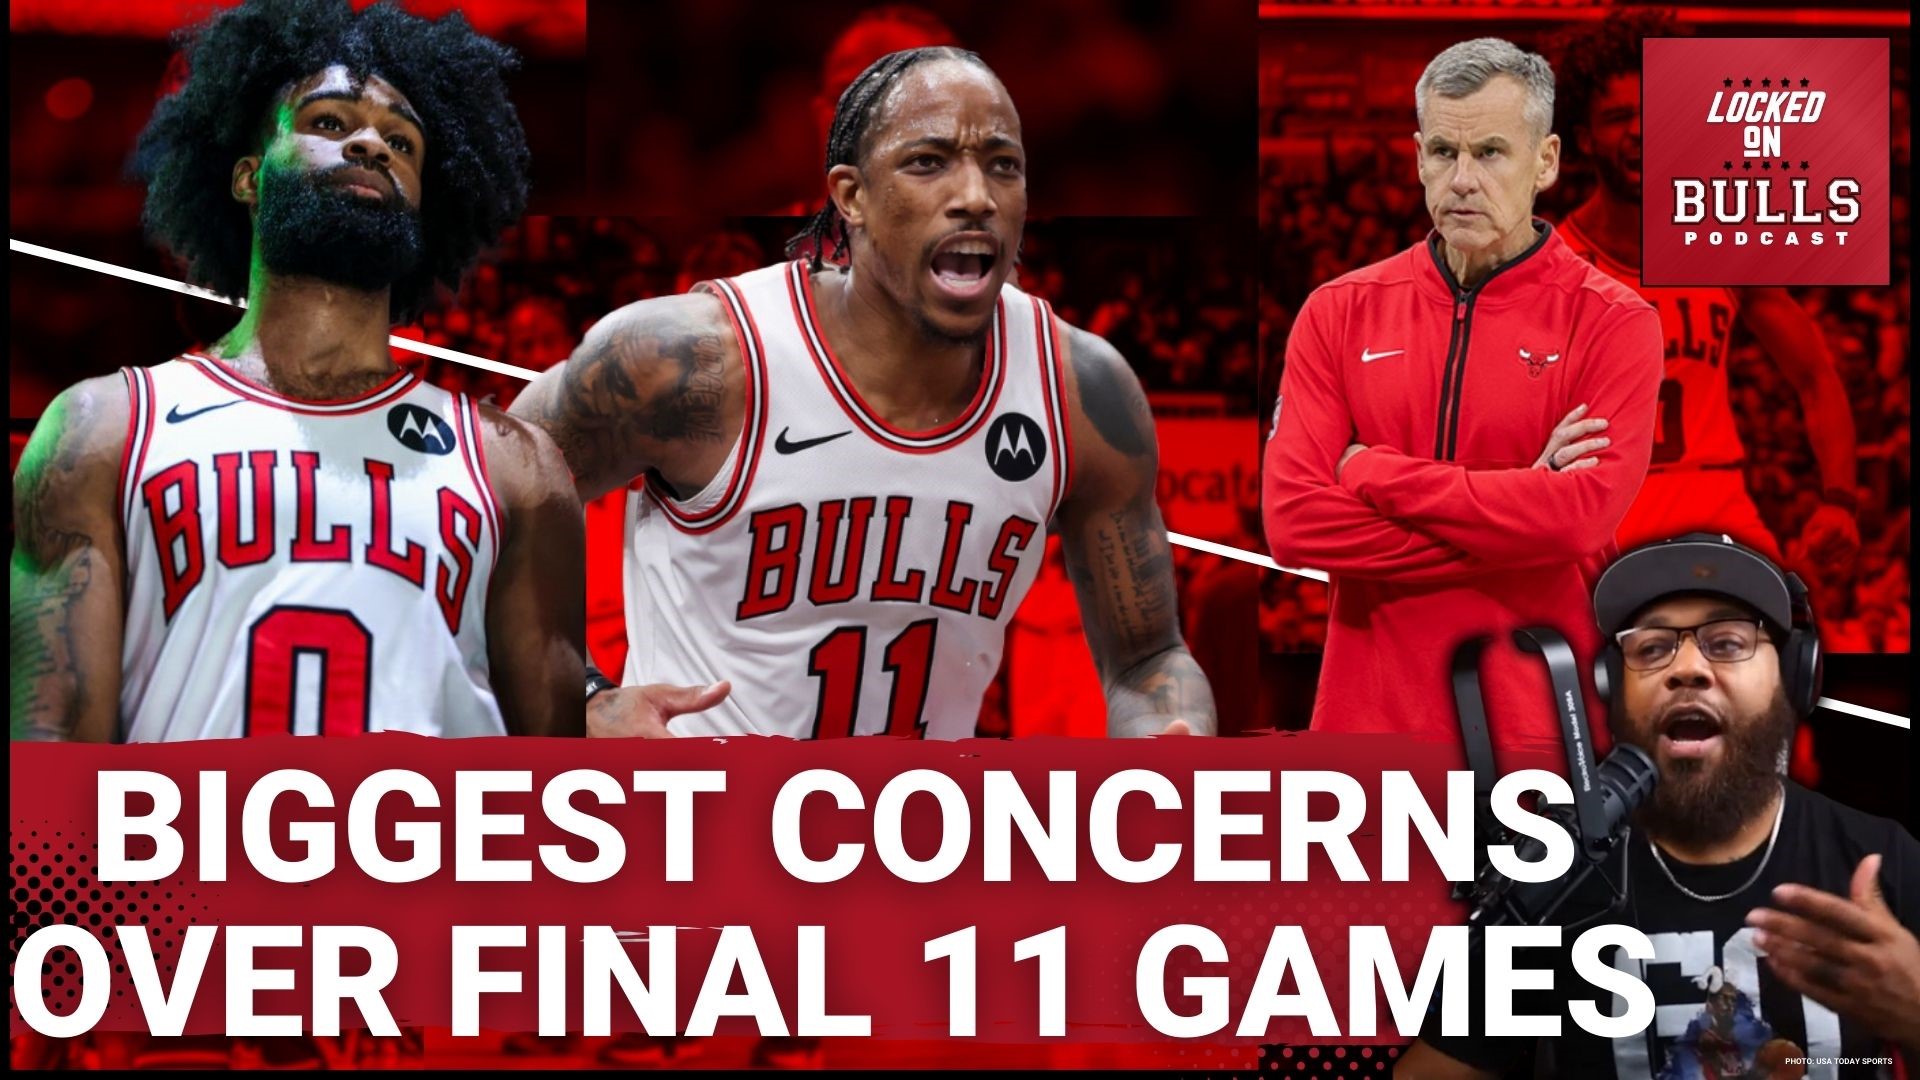 Haize discusses the Bulls' inability to get over the .500 mark while also looking at the week ahead. Haize also talks about the Bulls burning Javonte Green back.